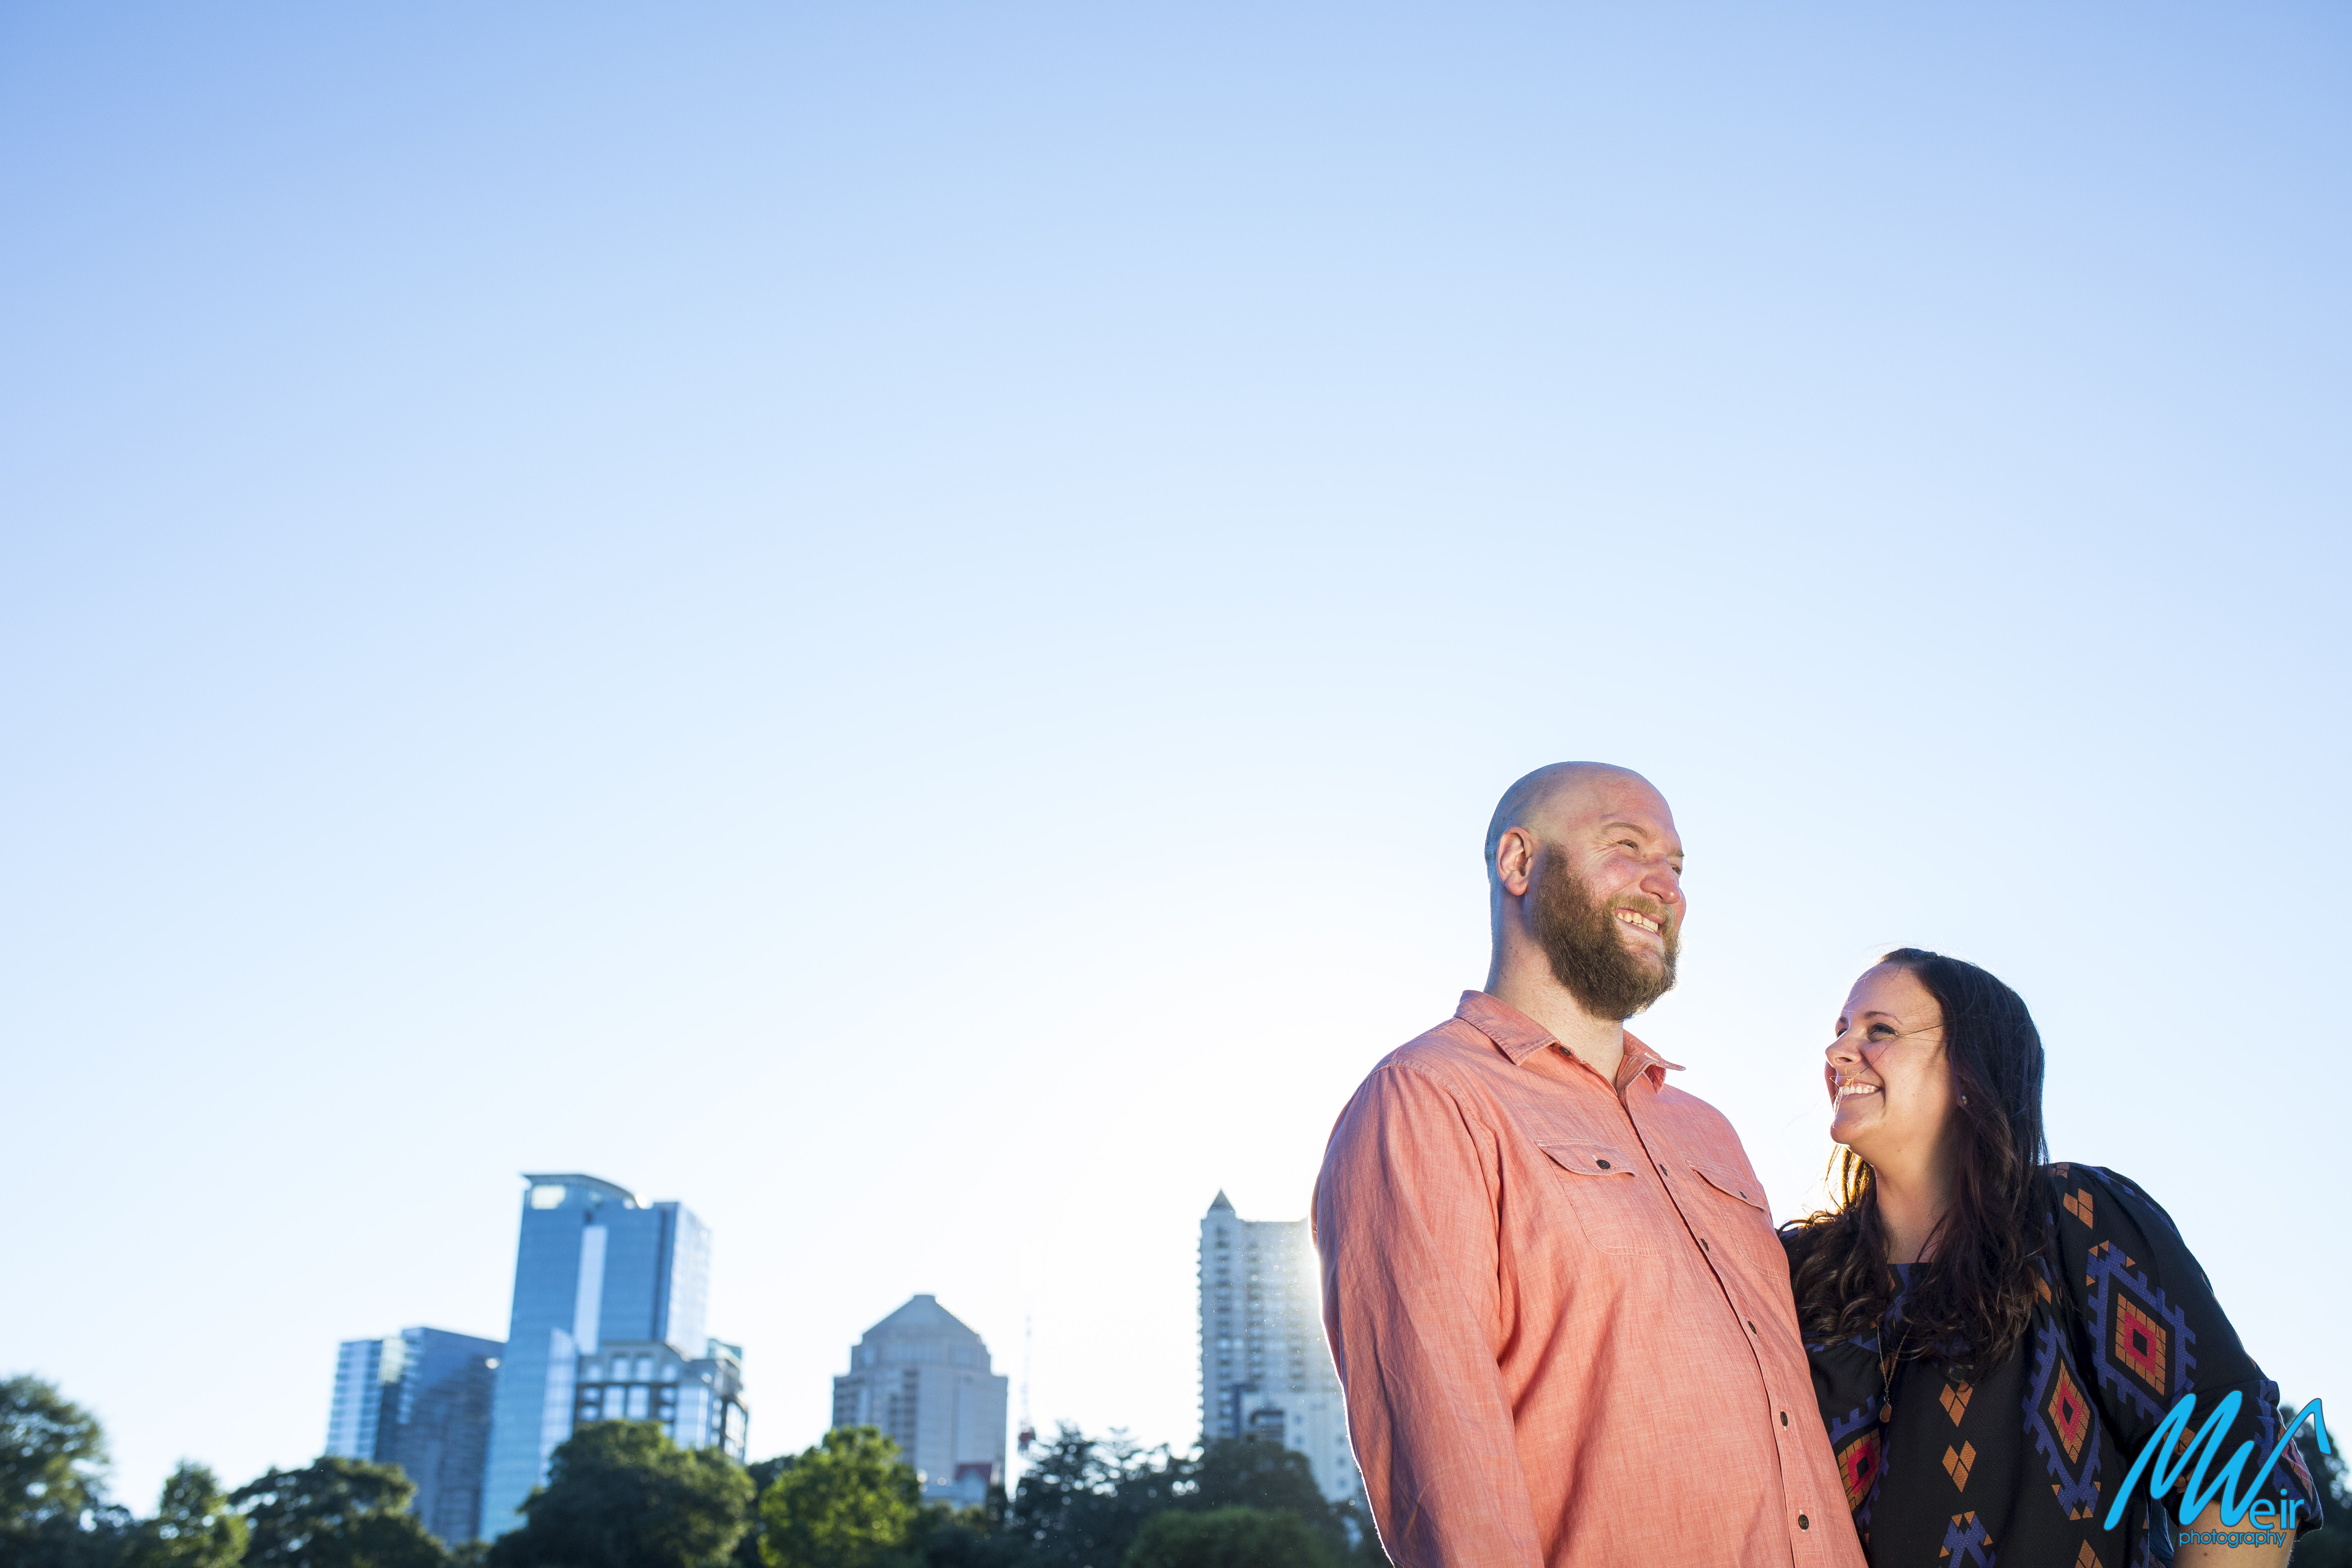 bride and groom stand in setting sun in front of skyline